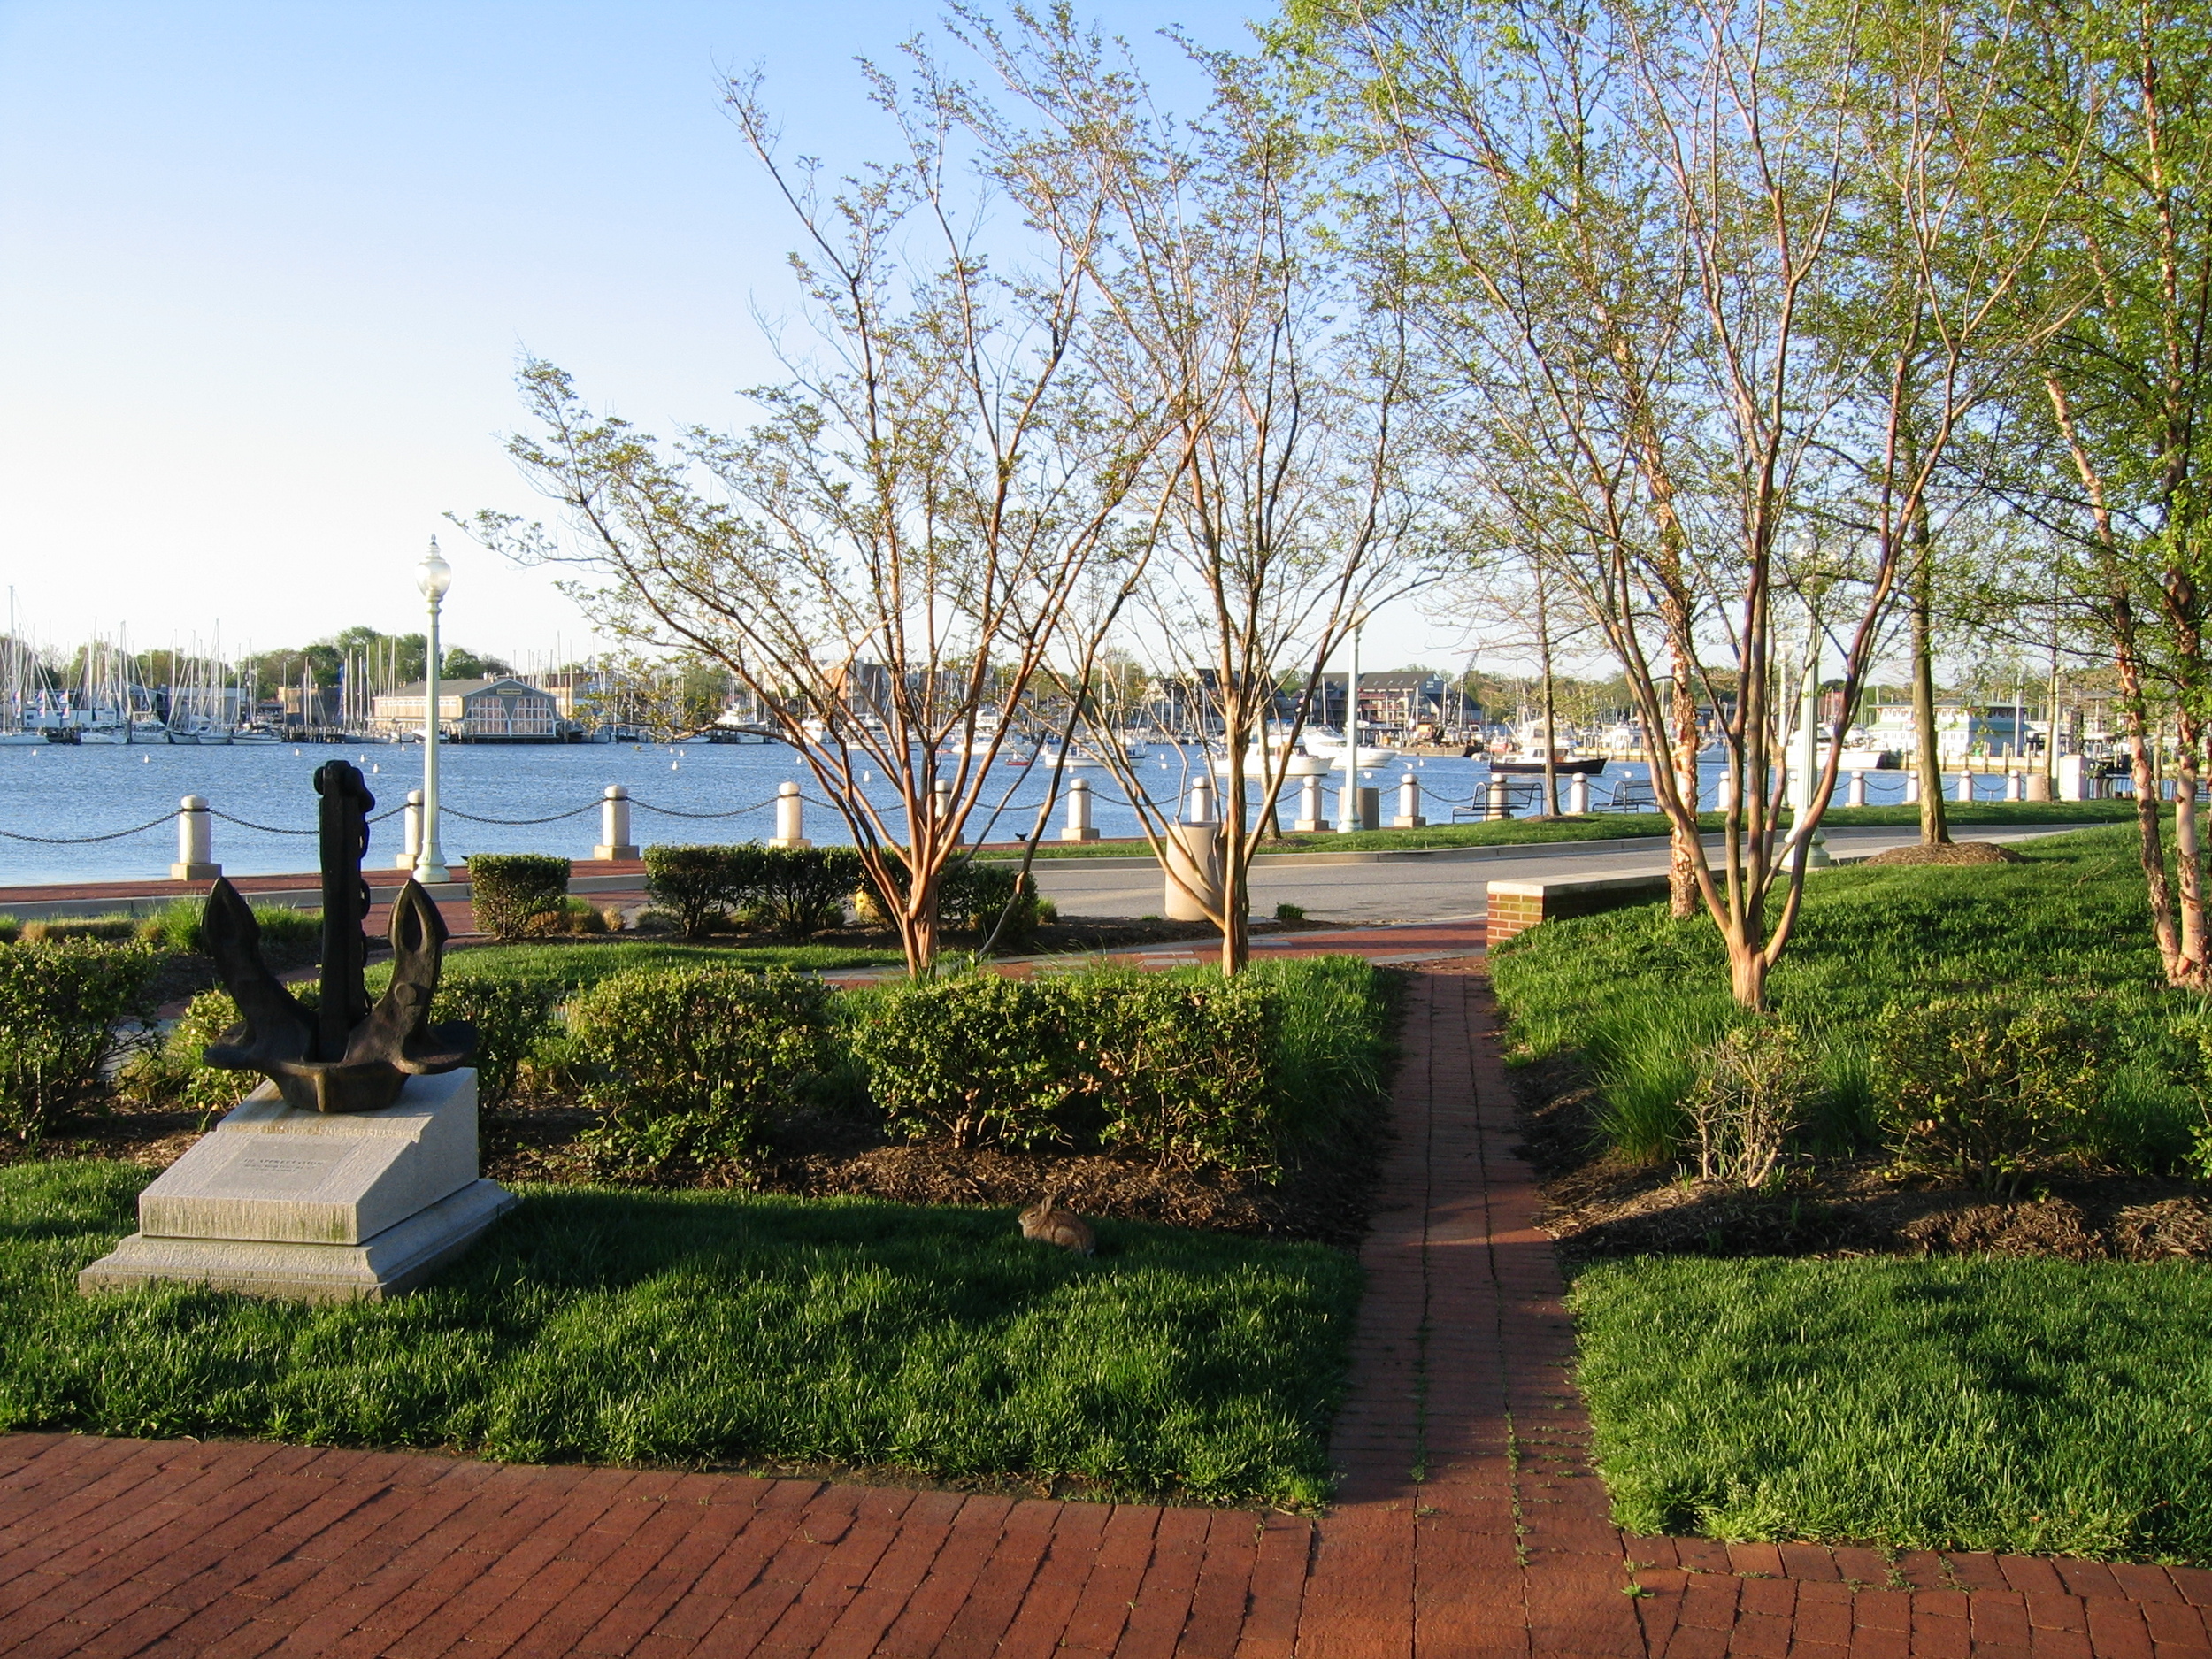   Project Location: &nbsp;&nbsp;Annapolis, MD  Completion: &nbsp;&nbsp;1985  Project Architect: &nbsp;CSD Architects  Primary Material Palette: &nbsp;granite, brick  Awards: &nbsp;Merit Award, American Society of Landscape Architects Maryland Chapter